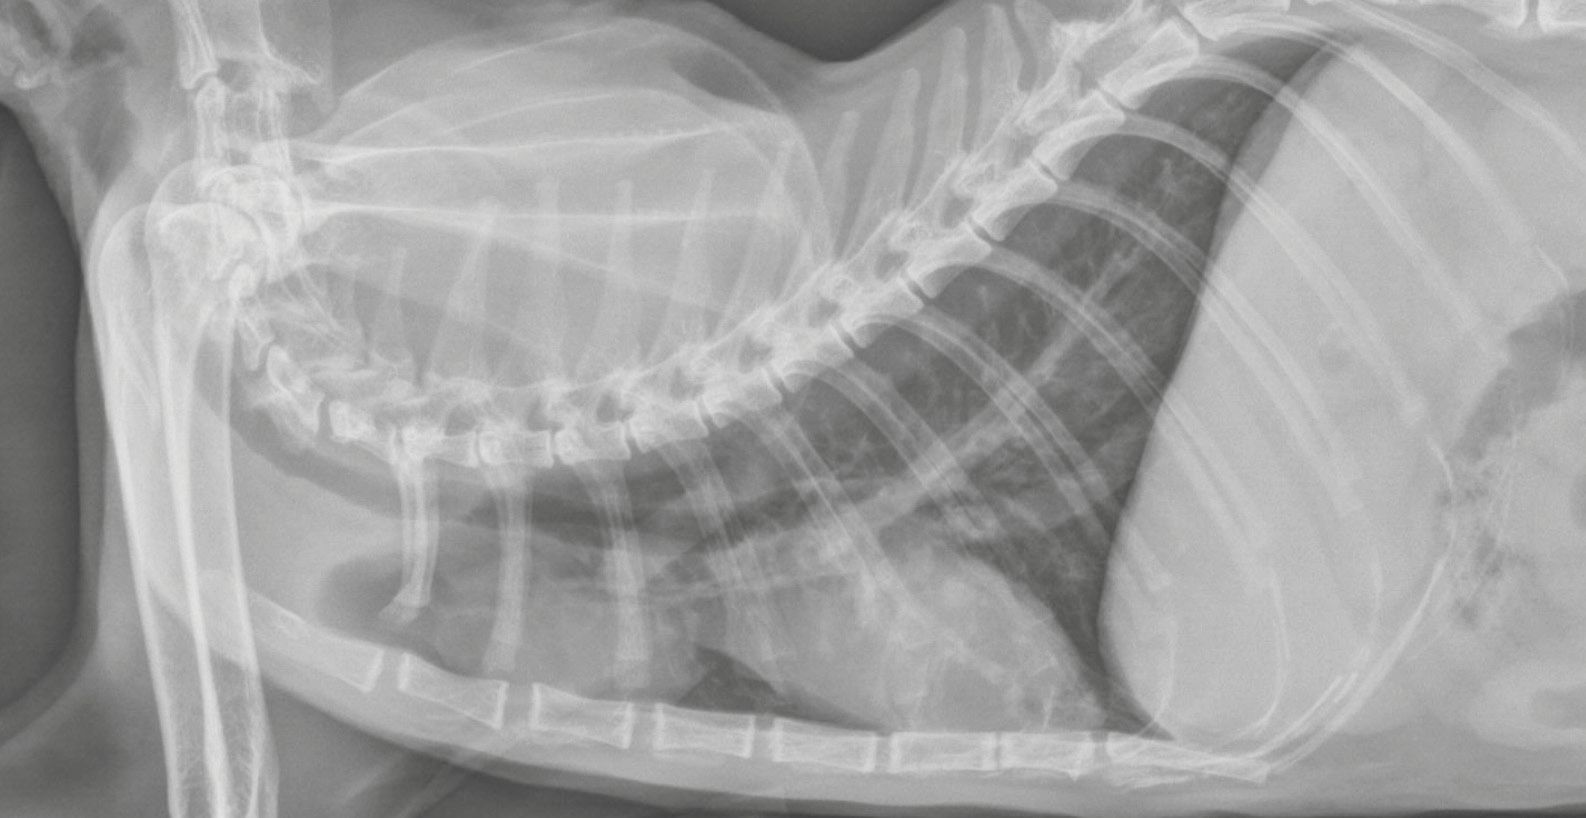 A lateral thoracic radiograph of a cat